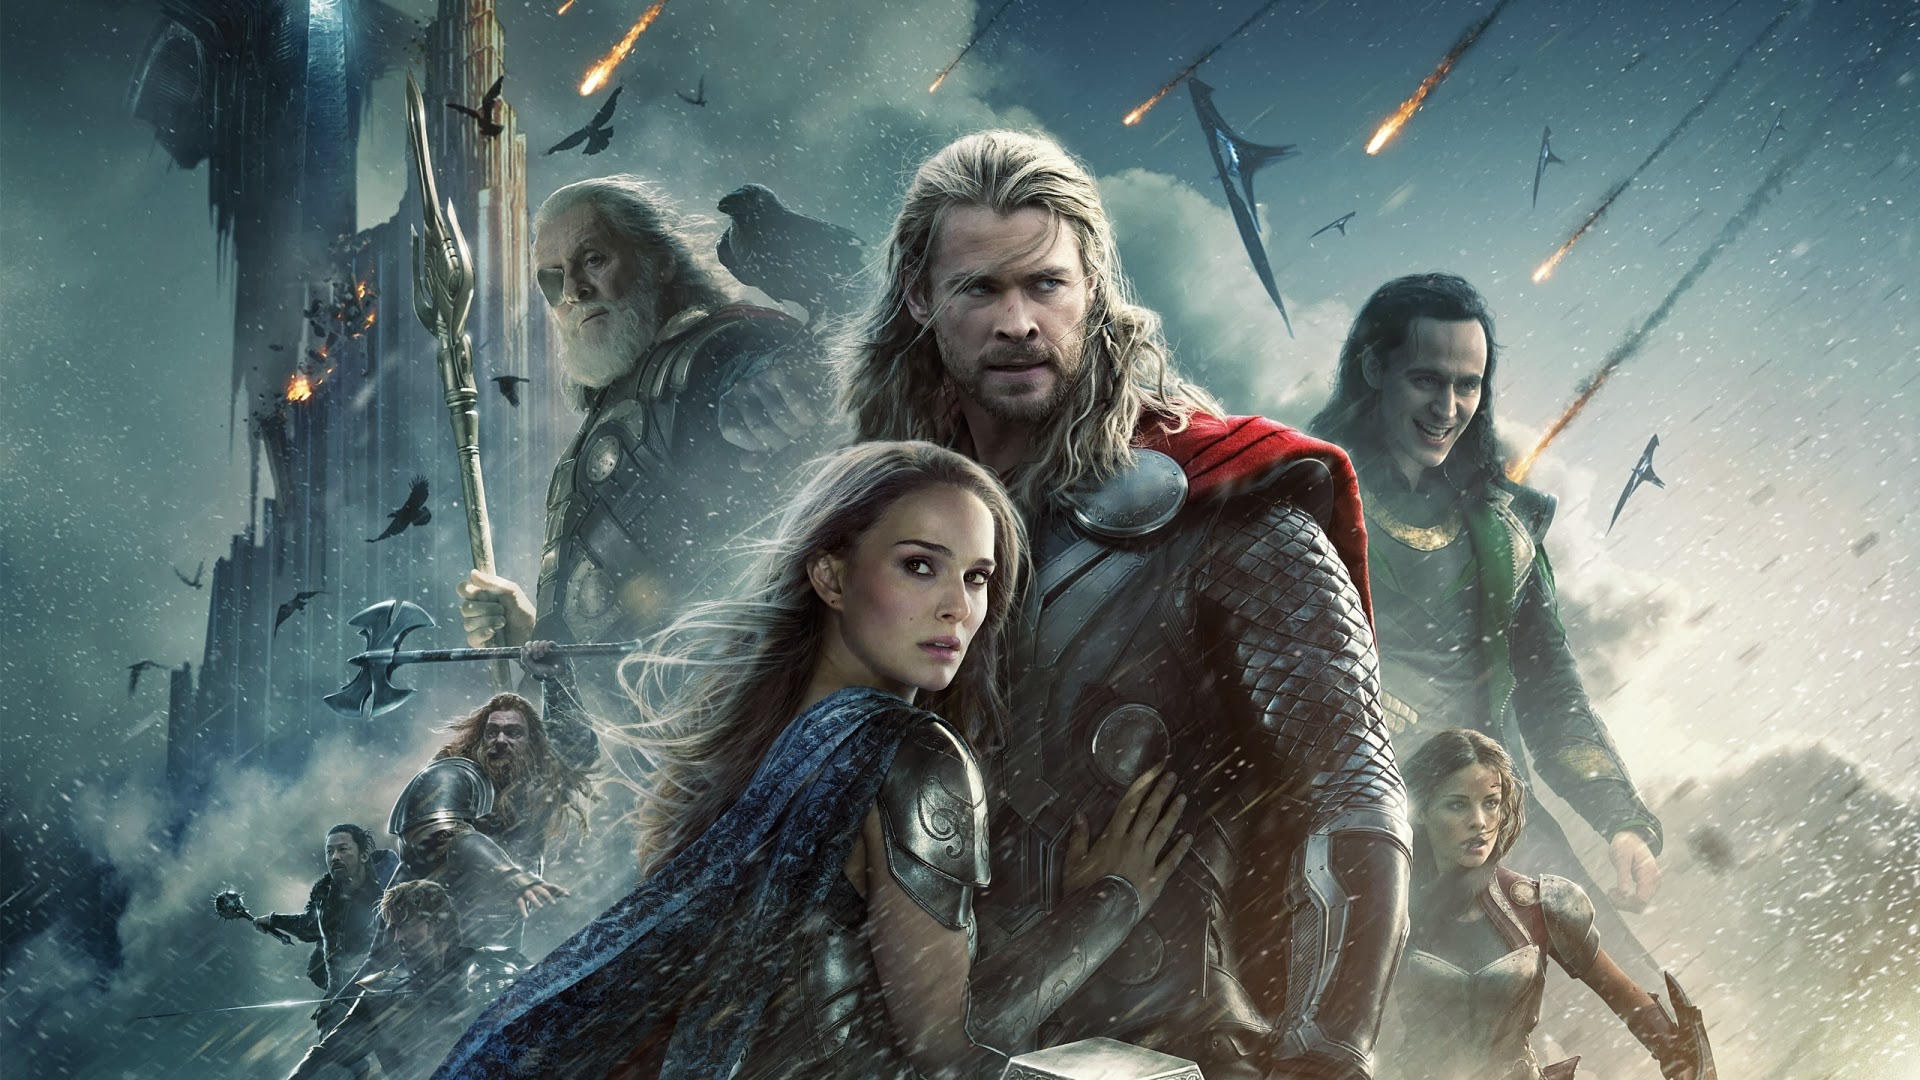 Thor The Dark World 2013 HD Wallpapers and Movie Poster Download Free ...